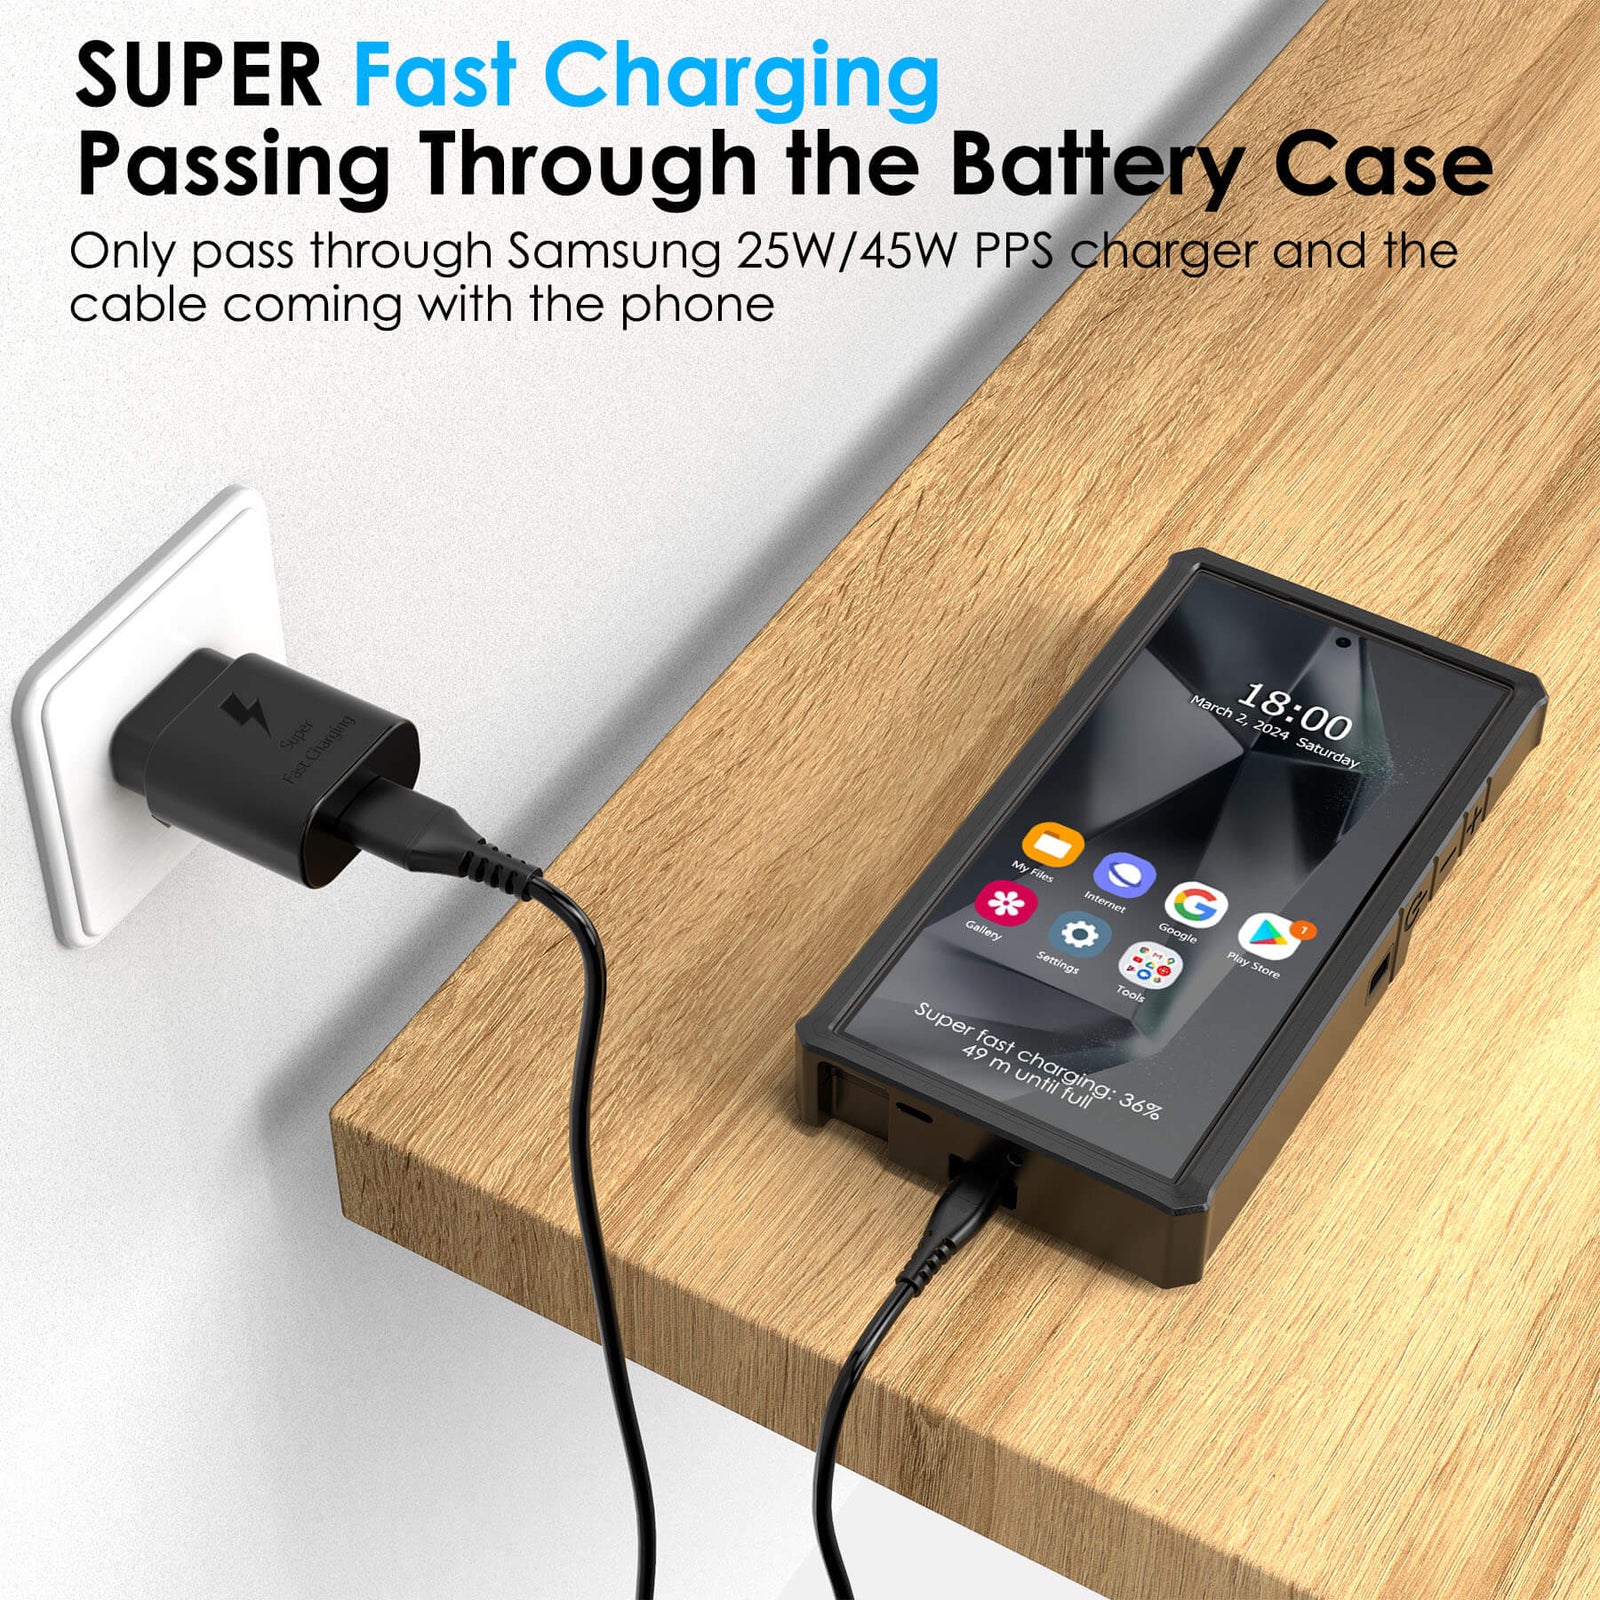 Super fast charging passes through ZeroLemon 10,000mAh Battery Case to Galaxy S24 Ultra with Samsung 25W/45W adapter